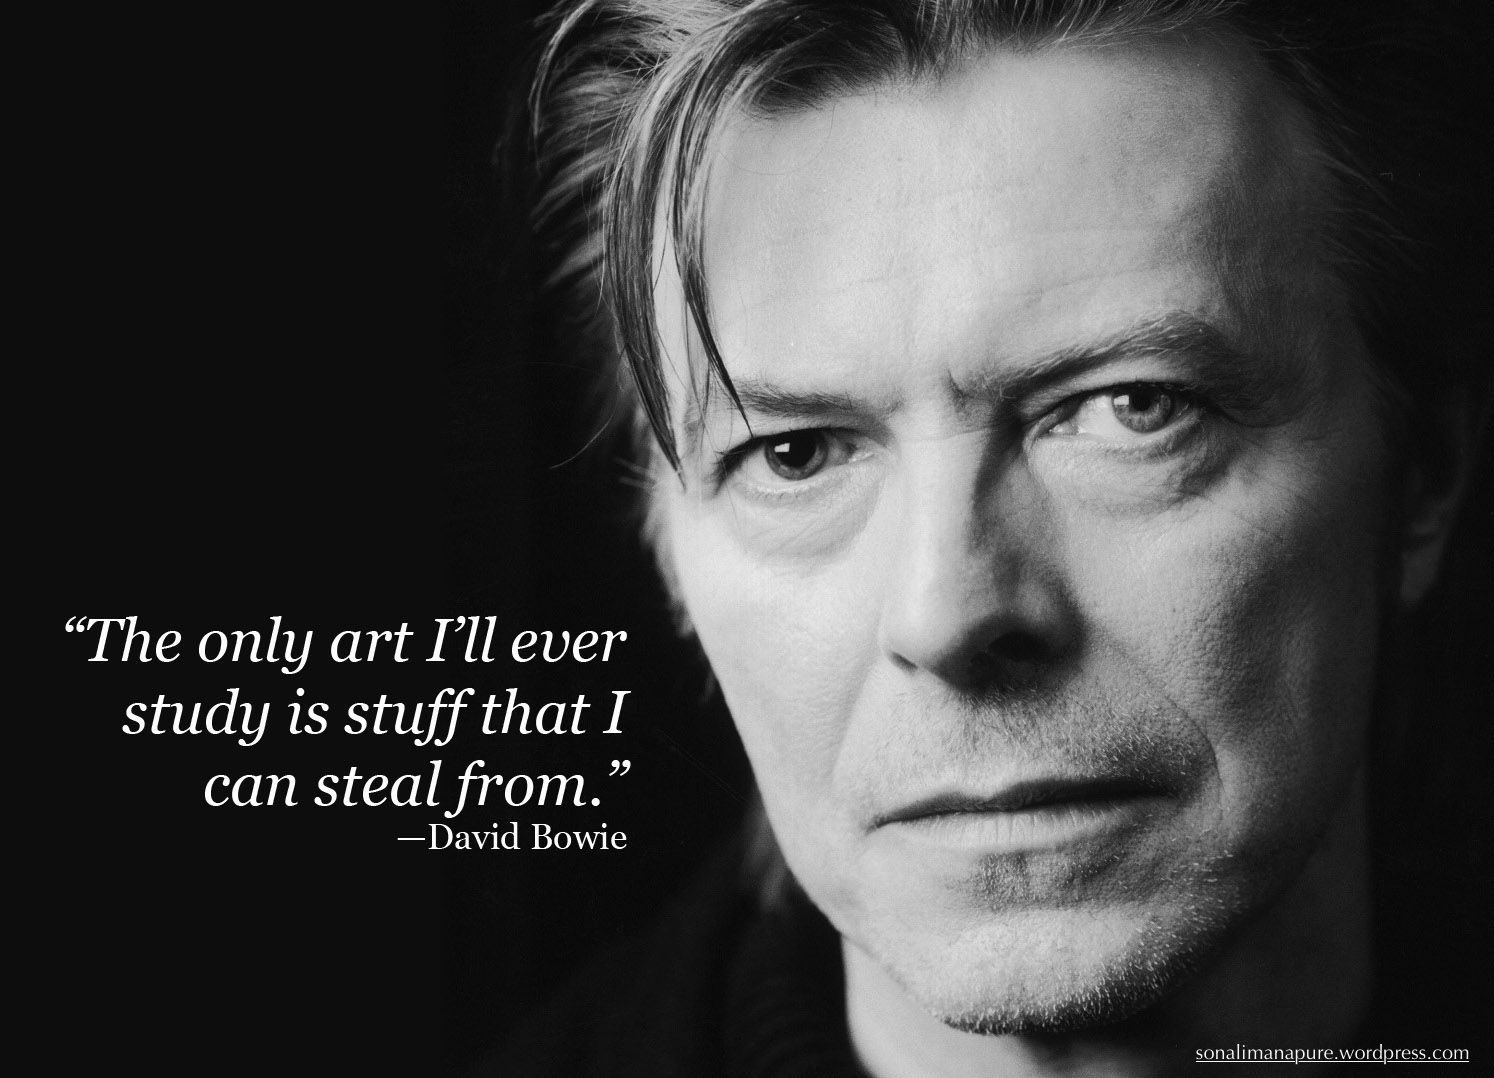 David Bowie quote: The only art I 'll ever study is stuff that I can steal  from. Book Review: Steal Like An Artist. | David bowie quotes, Bowie  quotes, David bowie